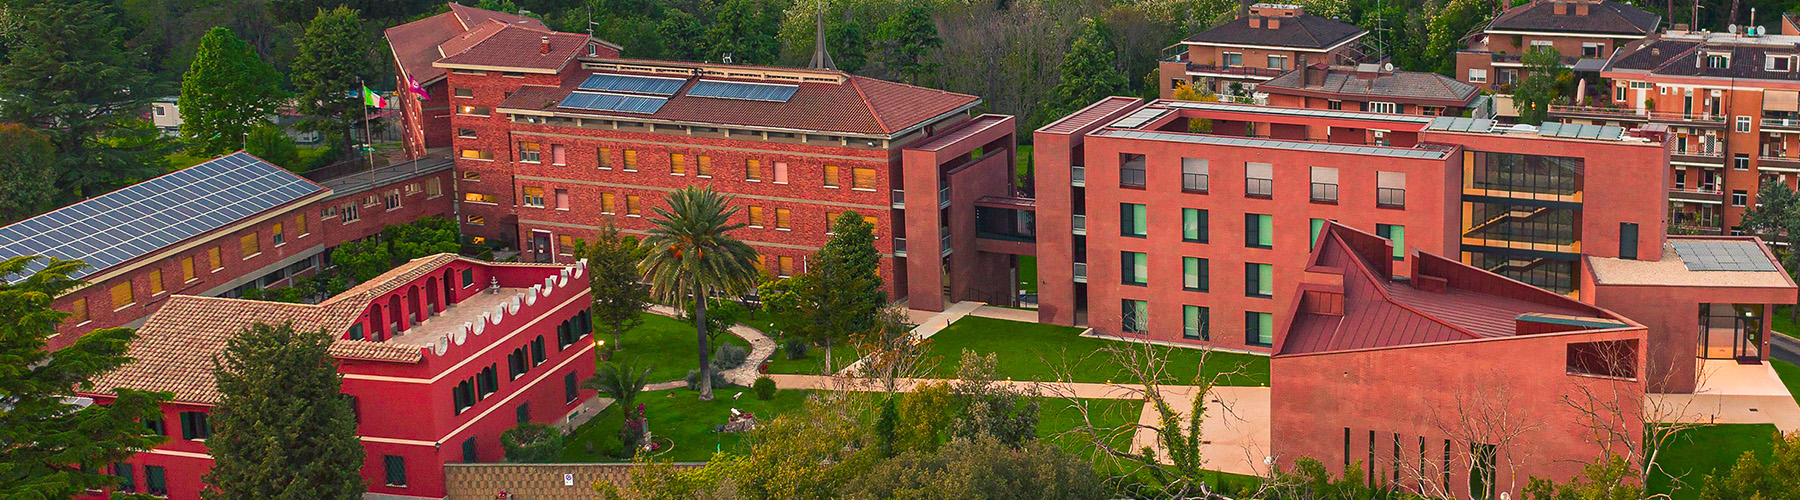 Aerial view of the JFRC campus